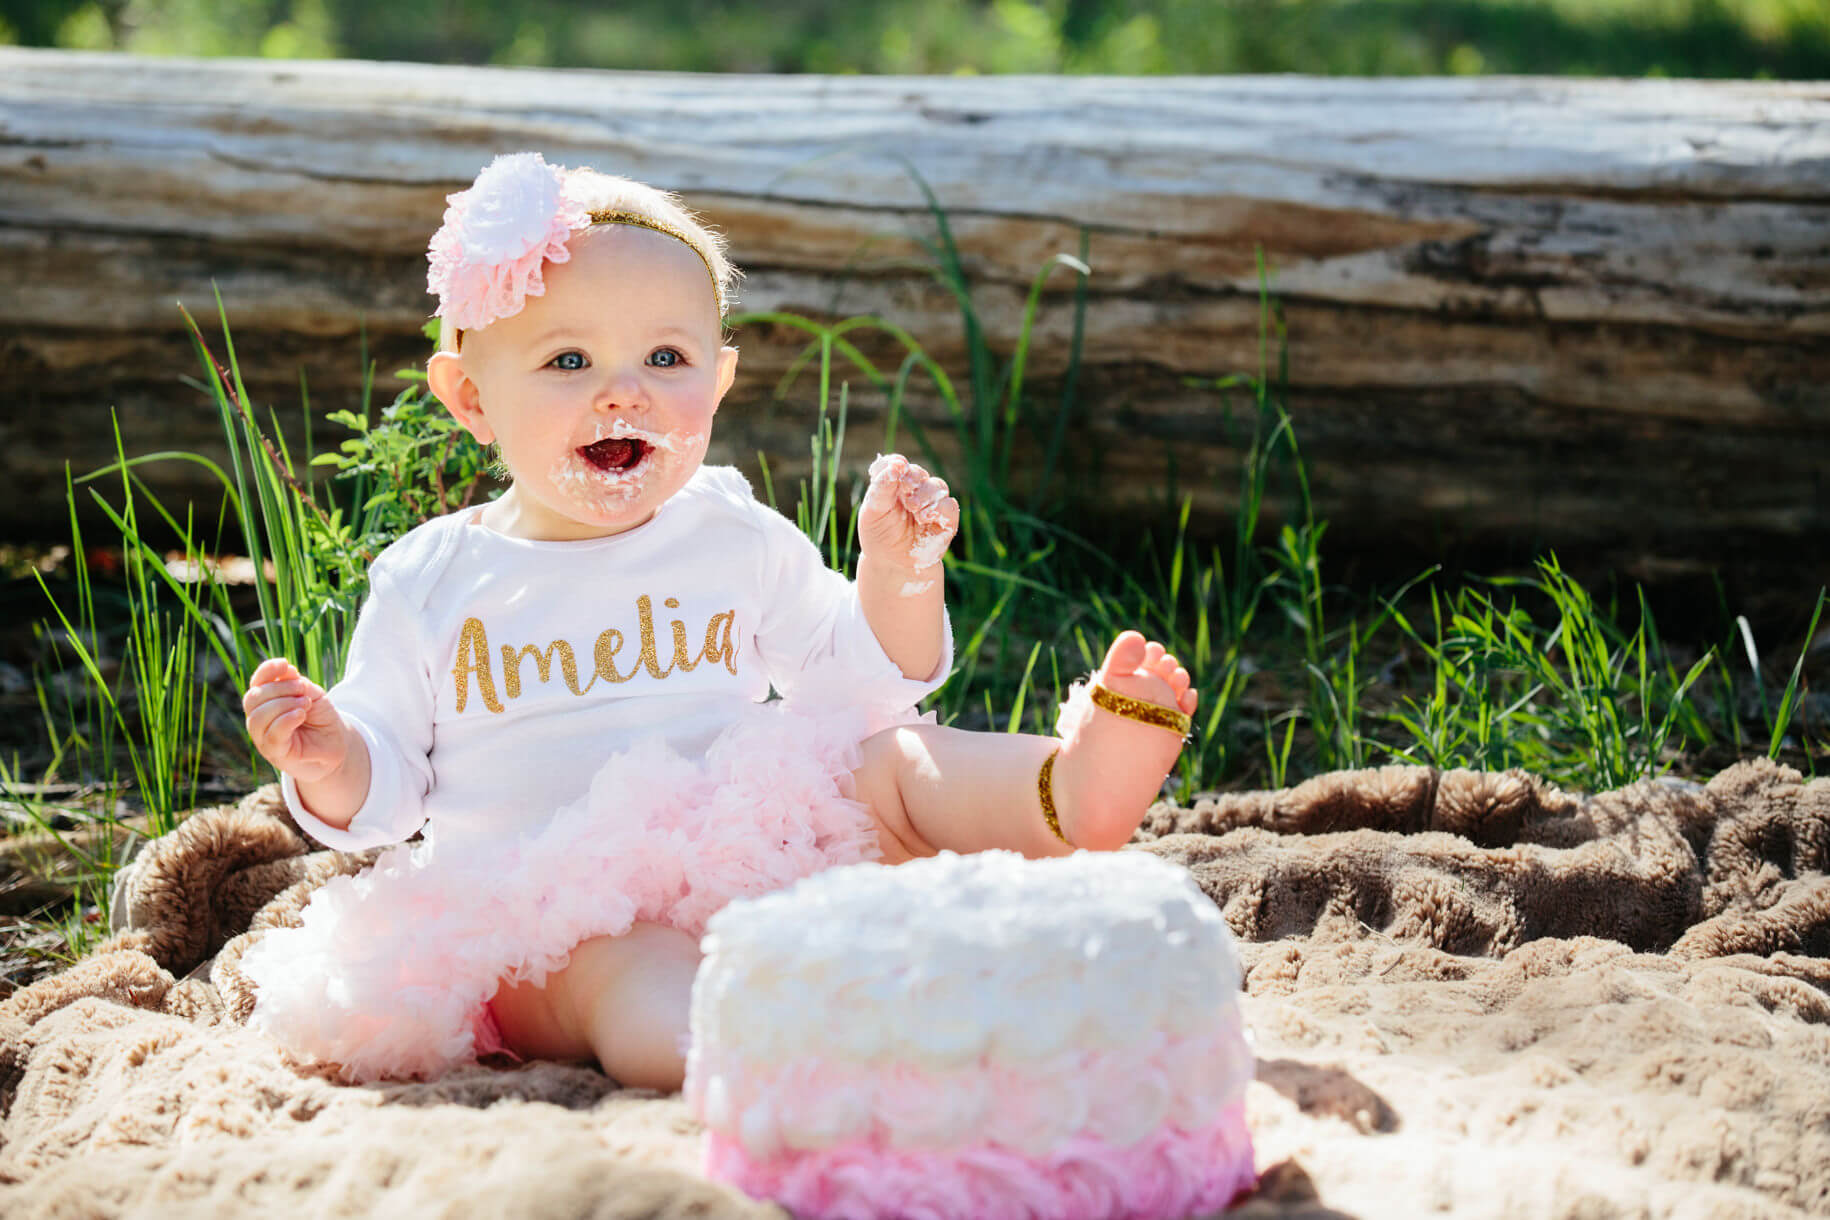 A one year old girl laughs and smiles as she smashes her birthday cake on her first birthday in Lolo Montana